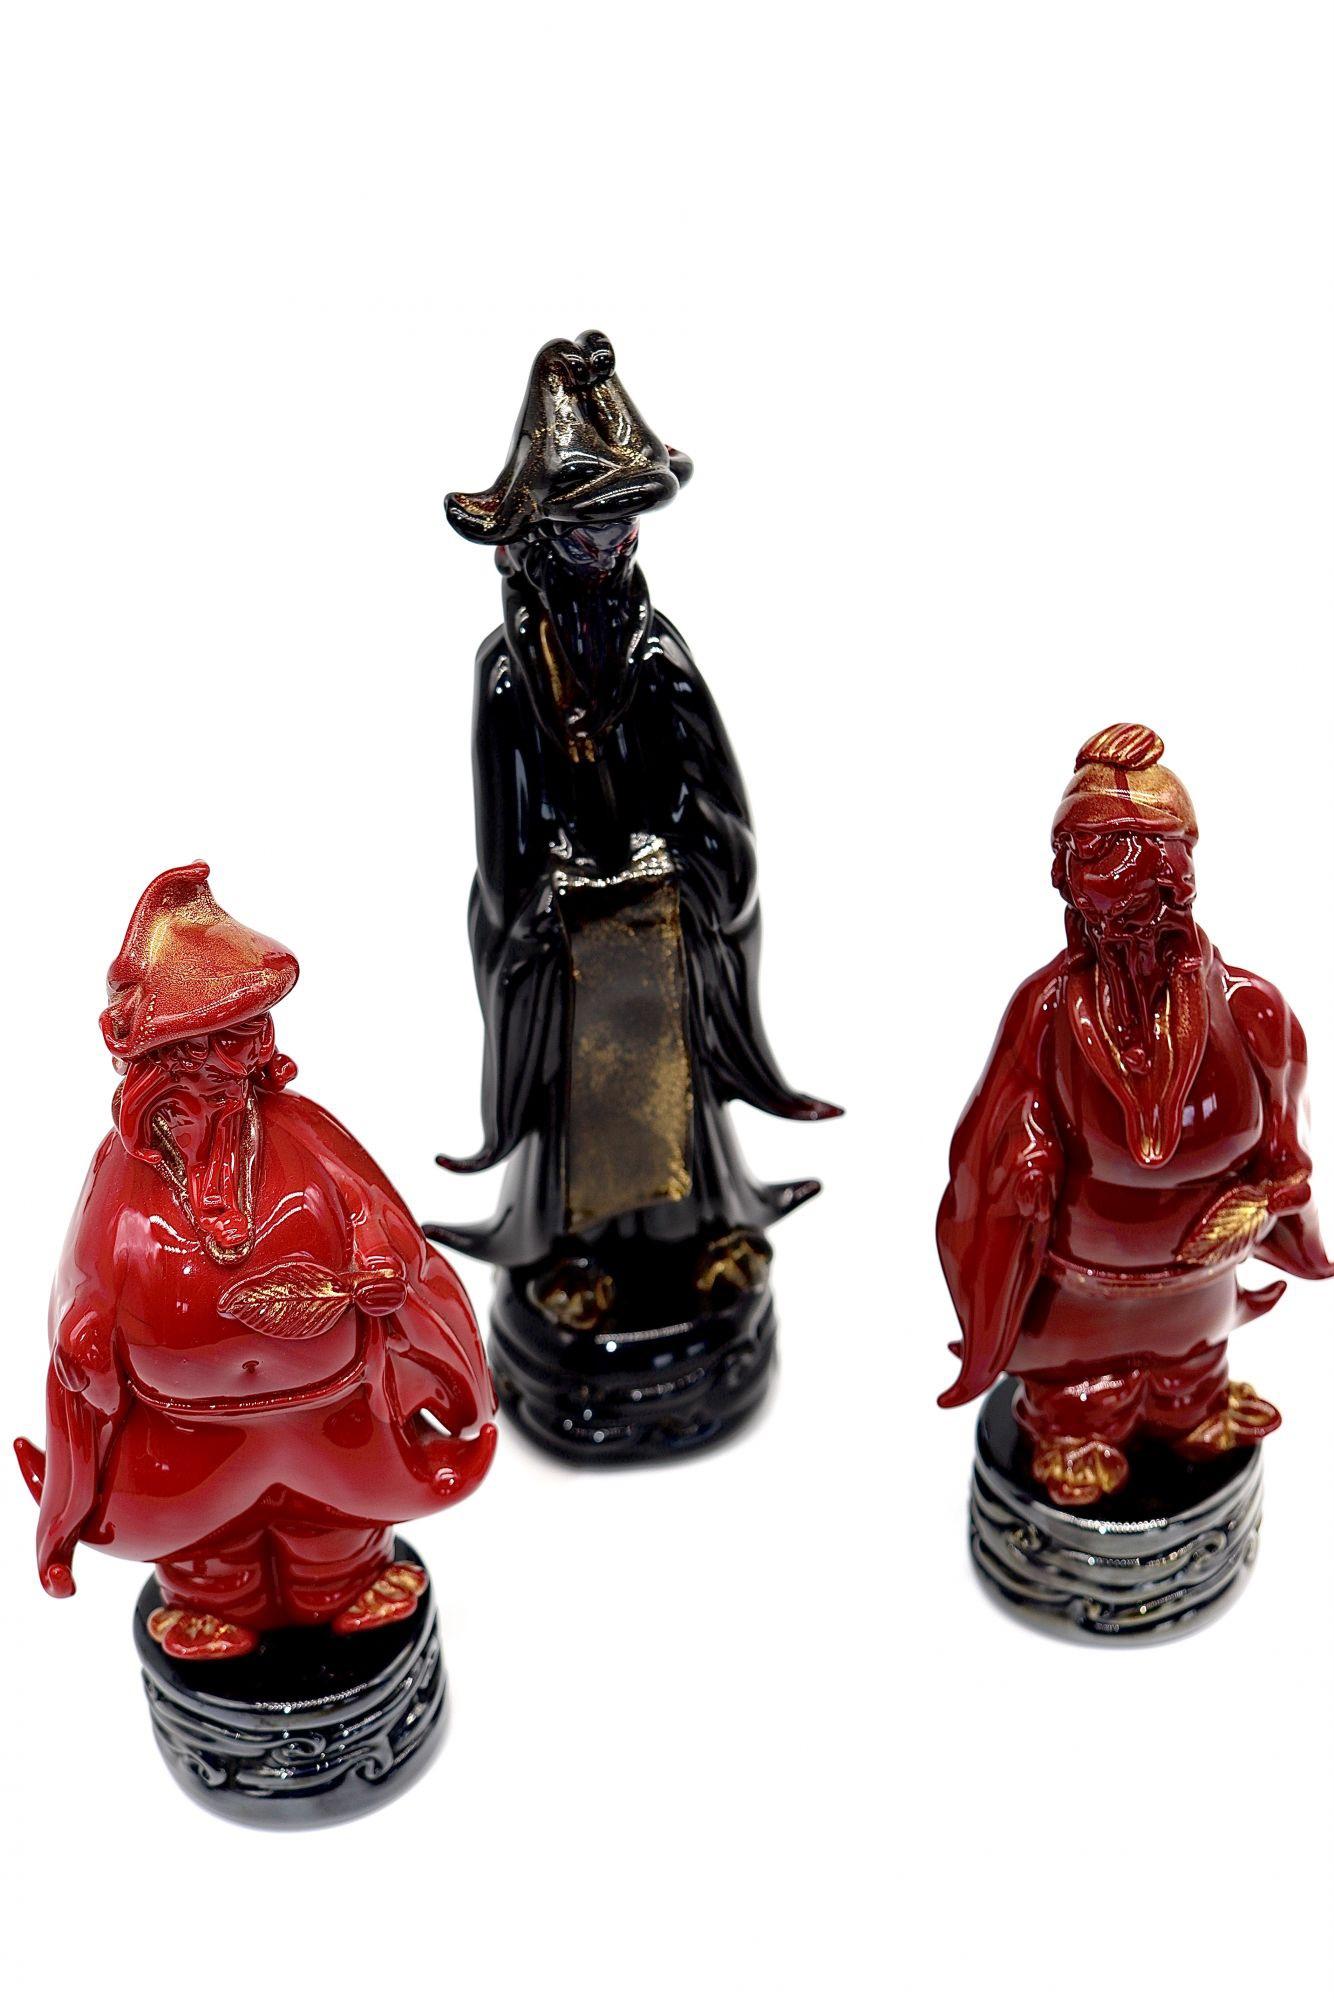 Italian (Venetian) Group of 3 rare, incredibly detailed and refined Oriental figurines, 3 males one in coral pasta glass, another in burgundy glass and the third in black glass. Standing on a black round bases with wave motif, they are perfect in